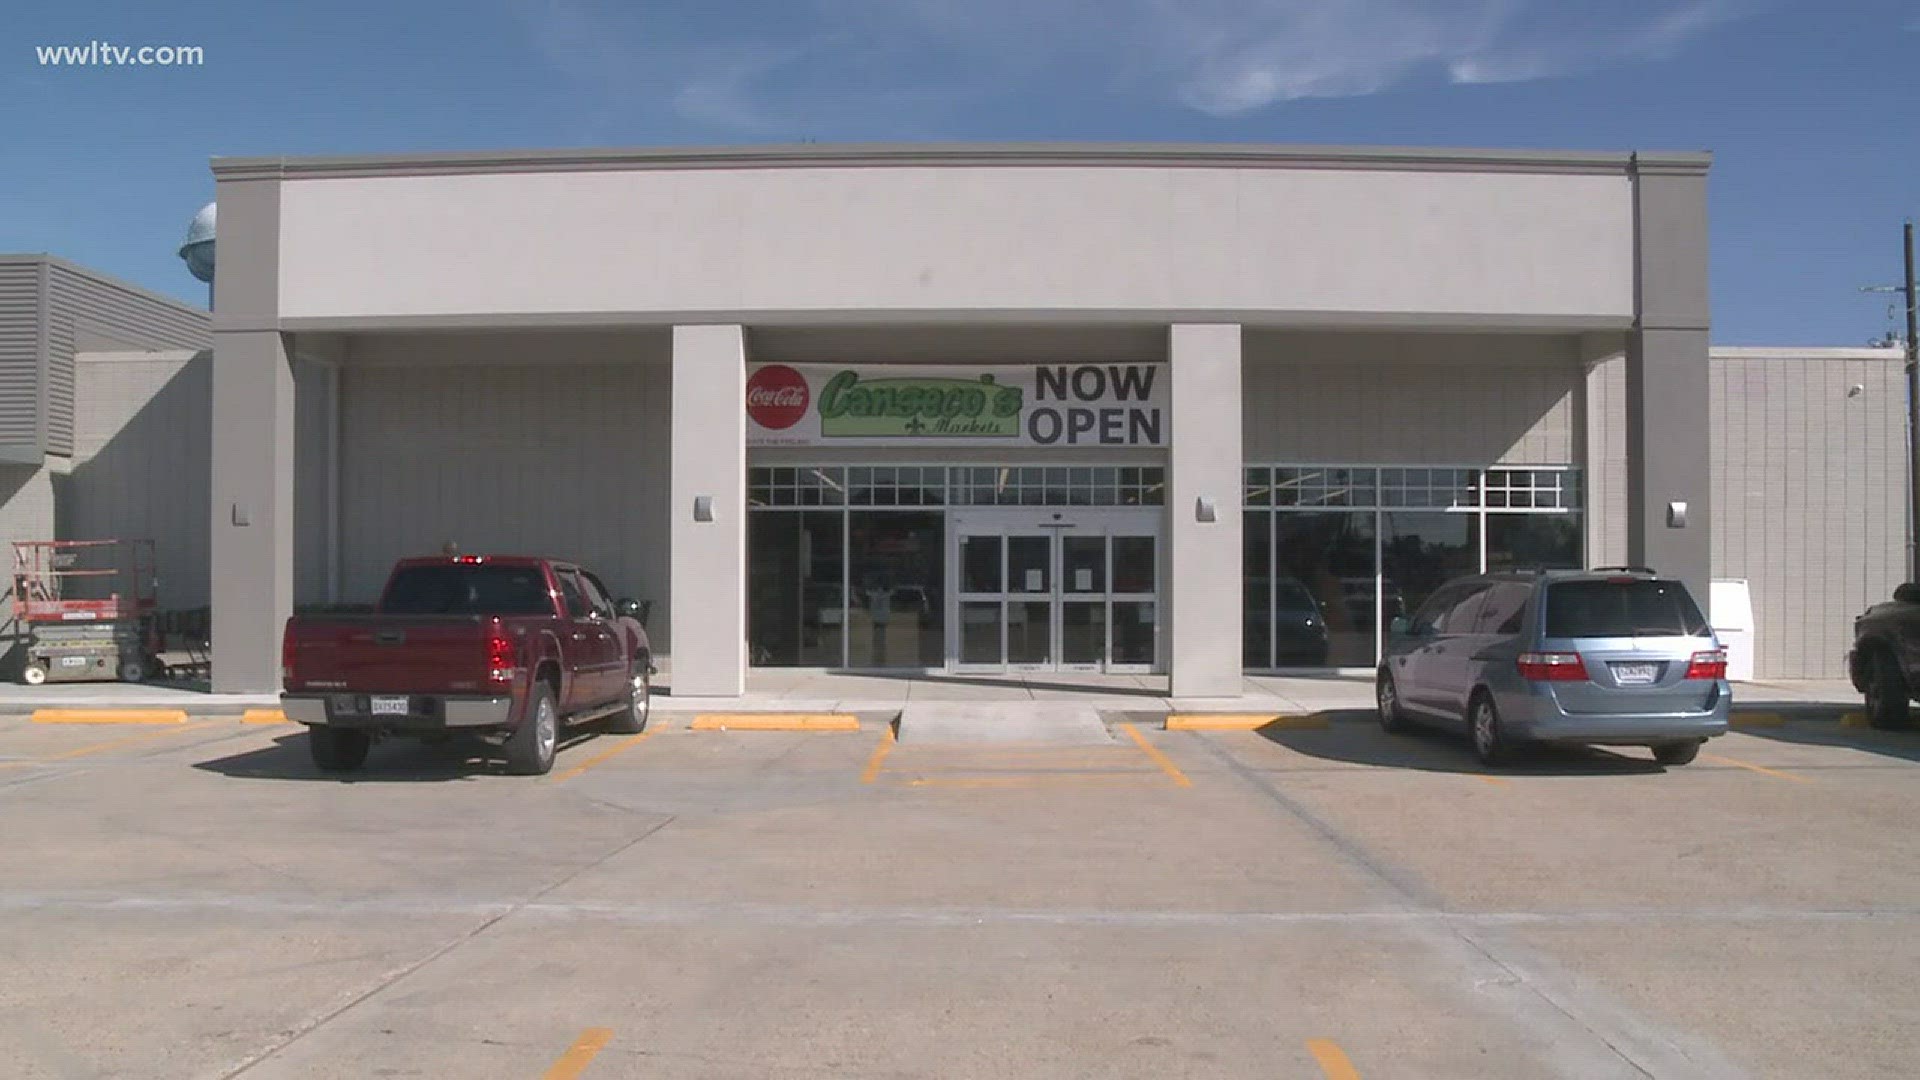 The store is located at 6735 St. Claude Avenue. The 11,600-square foot store will be open 7 a.m. to 9 p.m. daily.